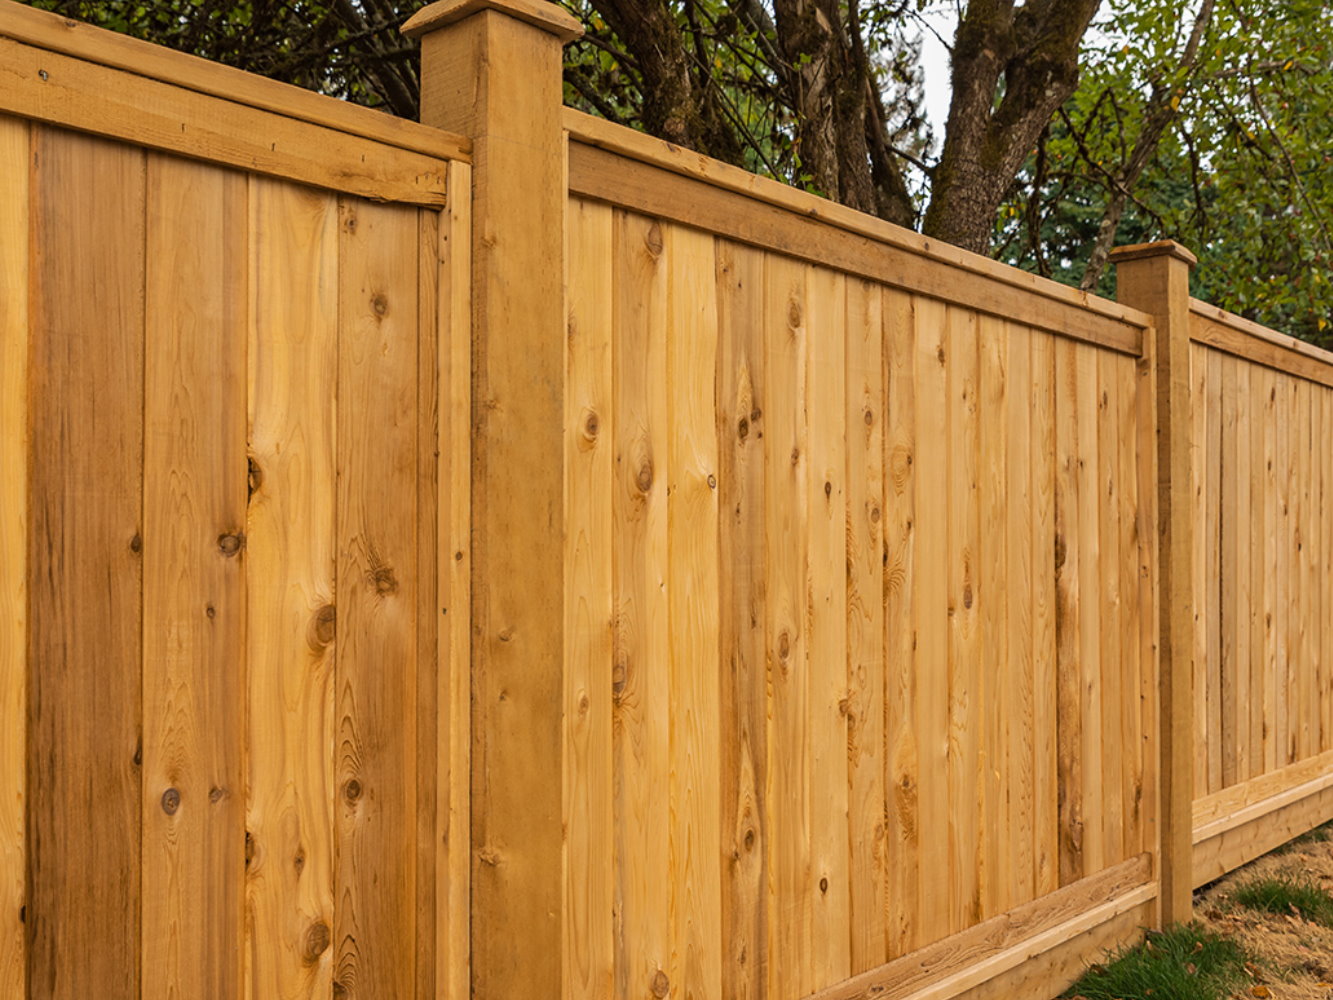 Pearson GA cap and trim style wood fence